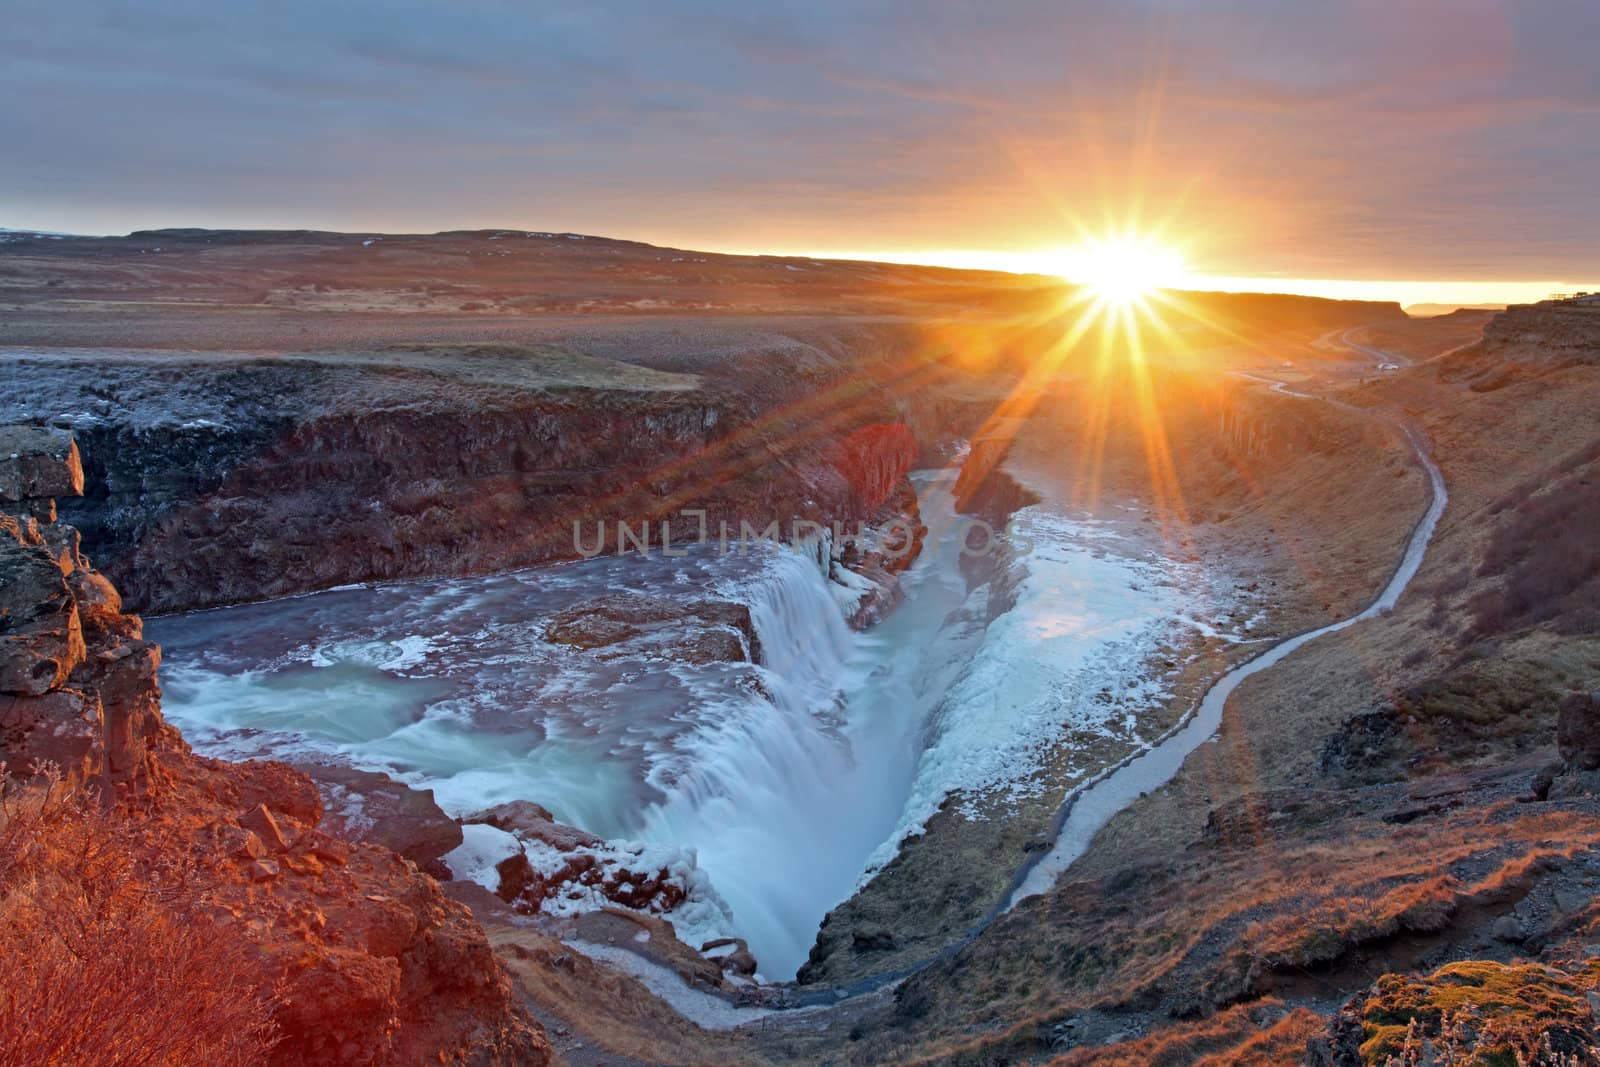 Gullfoss waterfall at sunset in Iceland during winter